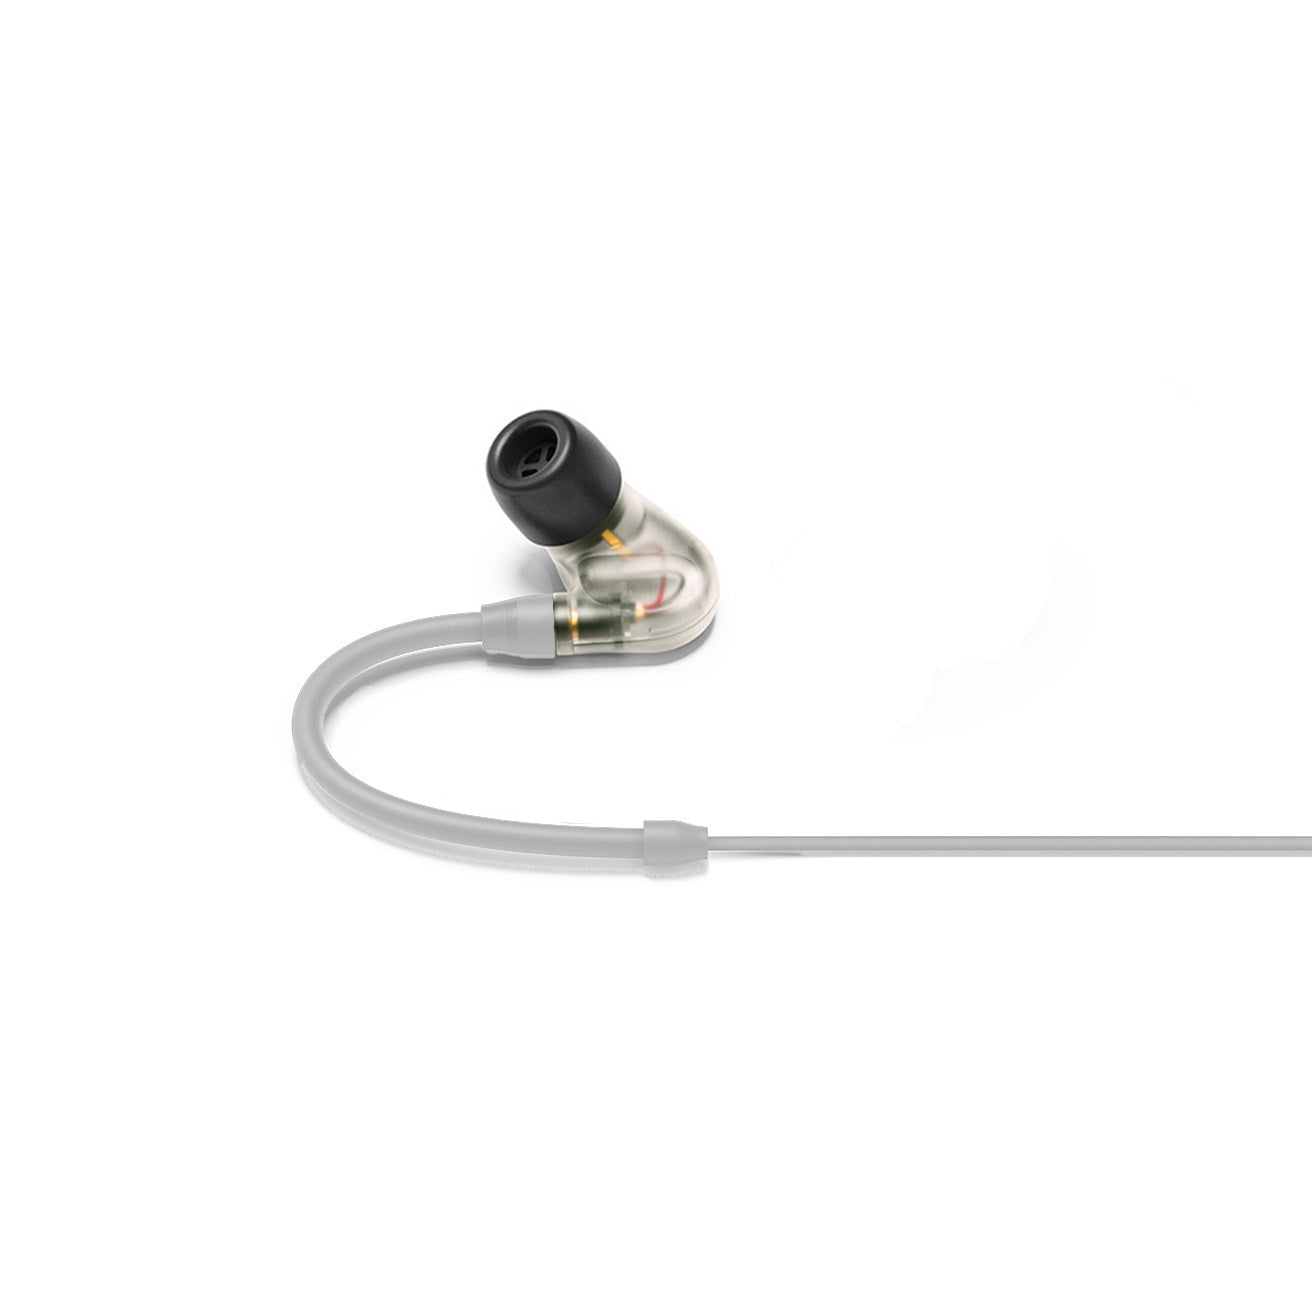 SENNHEISER LEFT IE 400 PRO CLEAR Replacement earphone for IE - Left IE